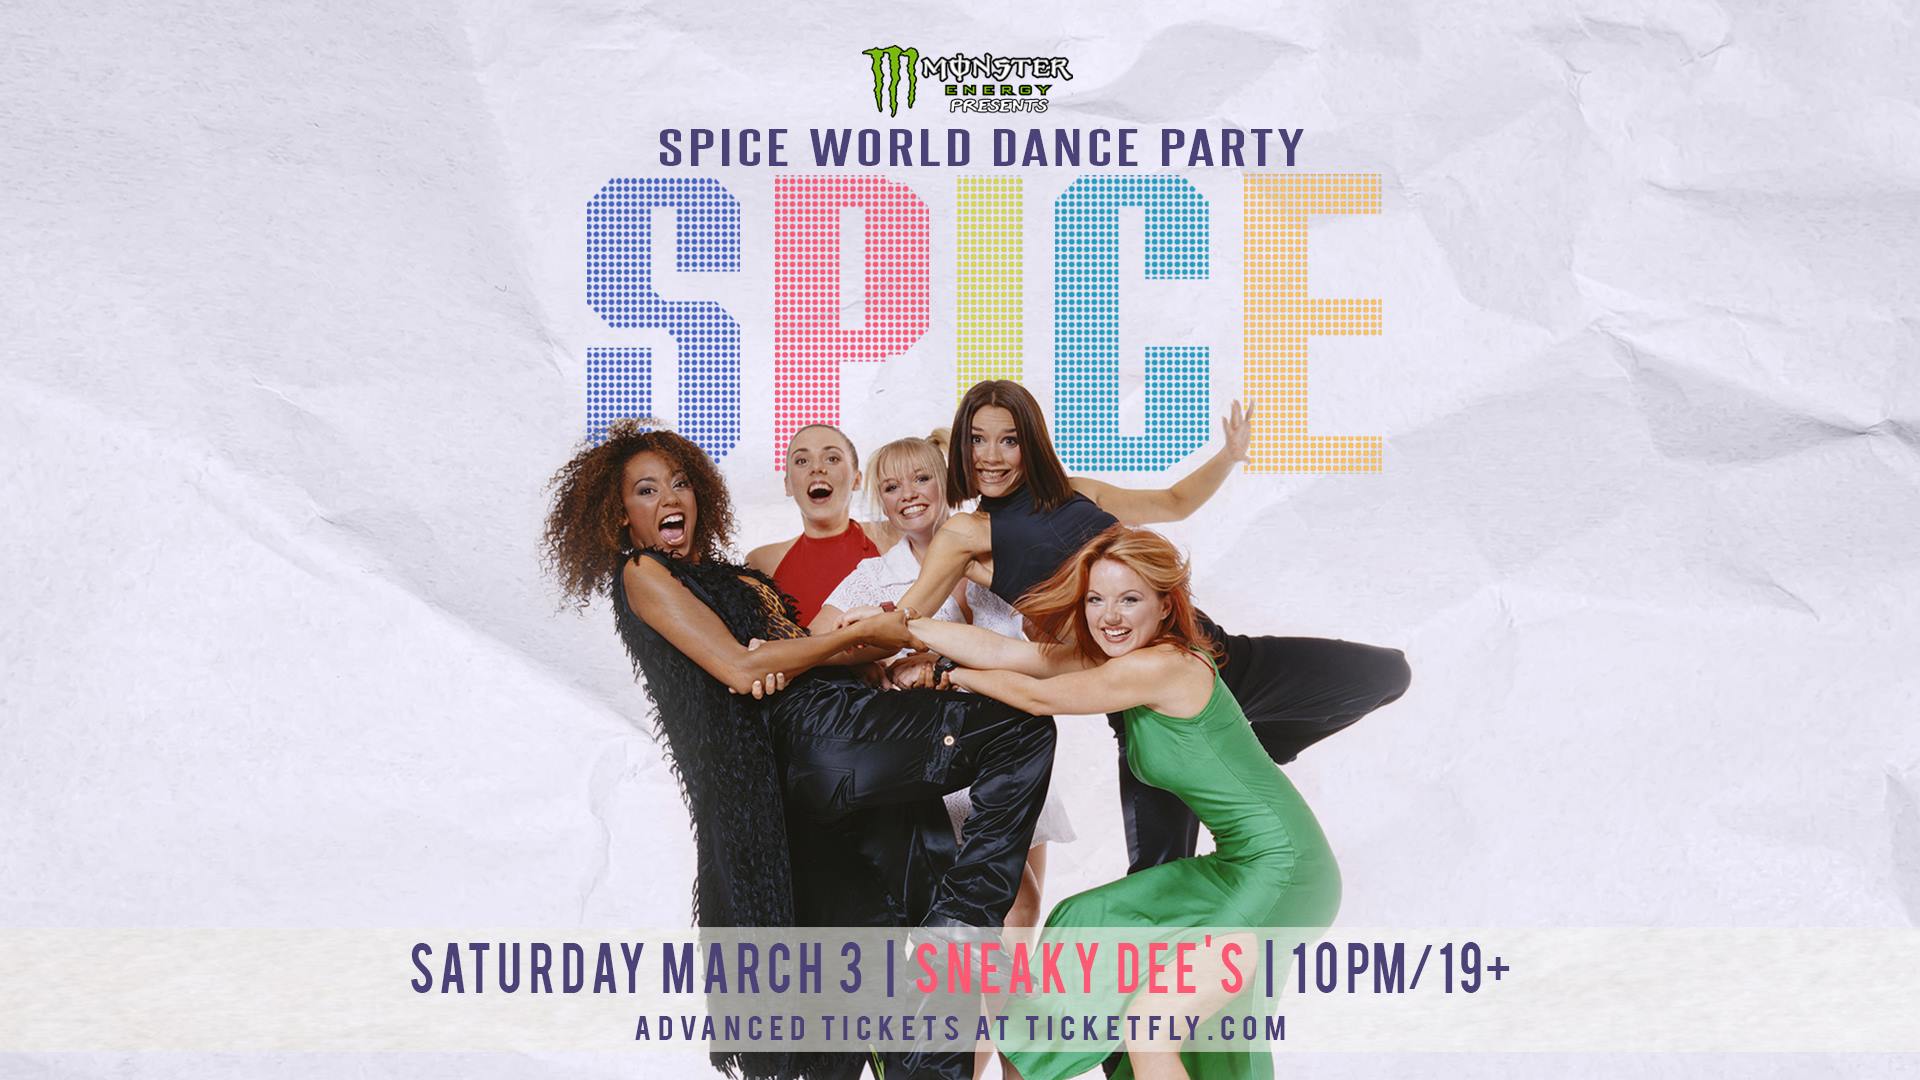 Spice World Dance Party